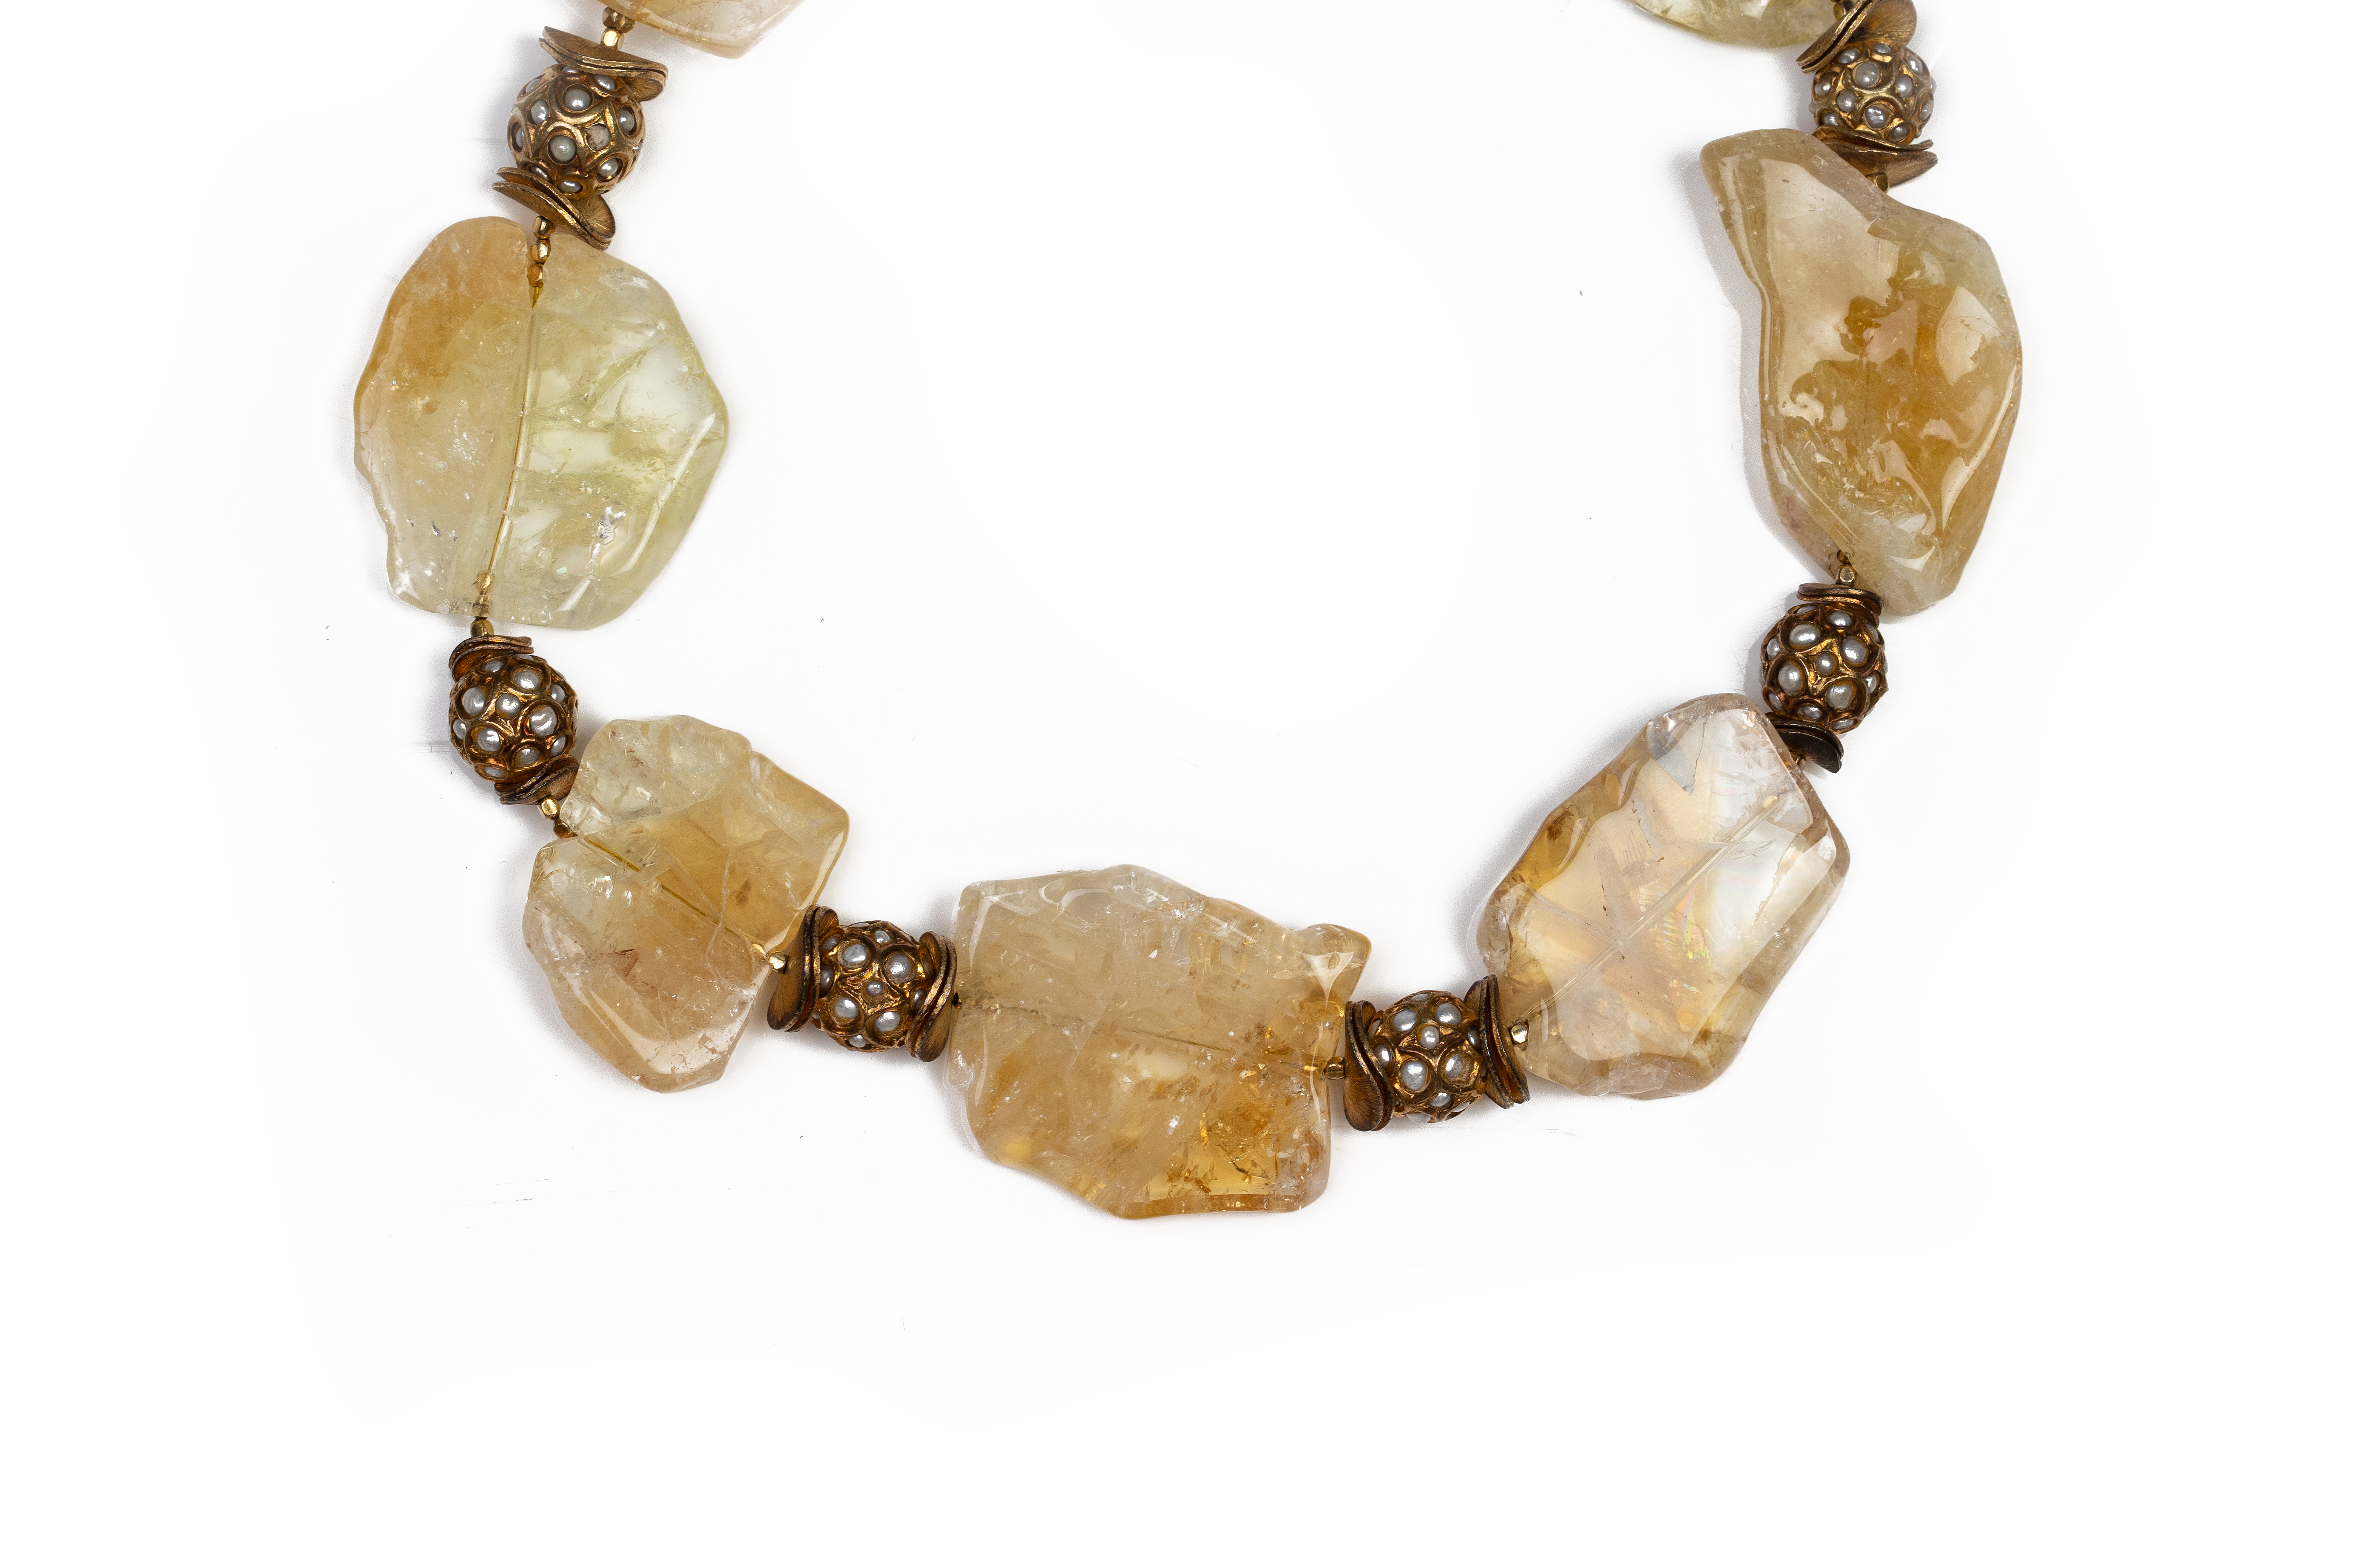 A MOJA JEWELLERY CITRINE GOLD AND PEARL BEADS NECKLACE - Image 2 of 3